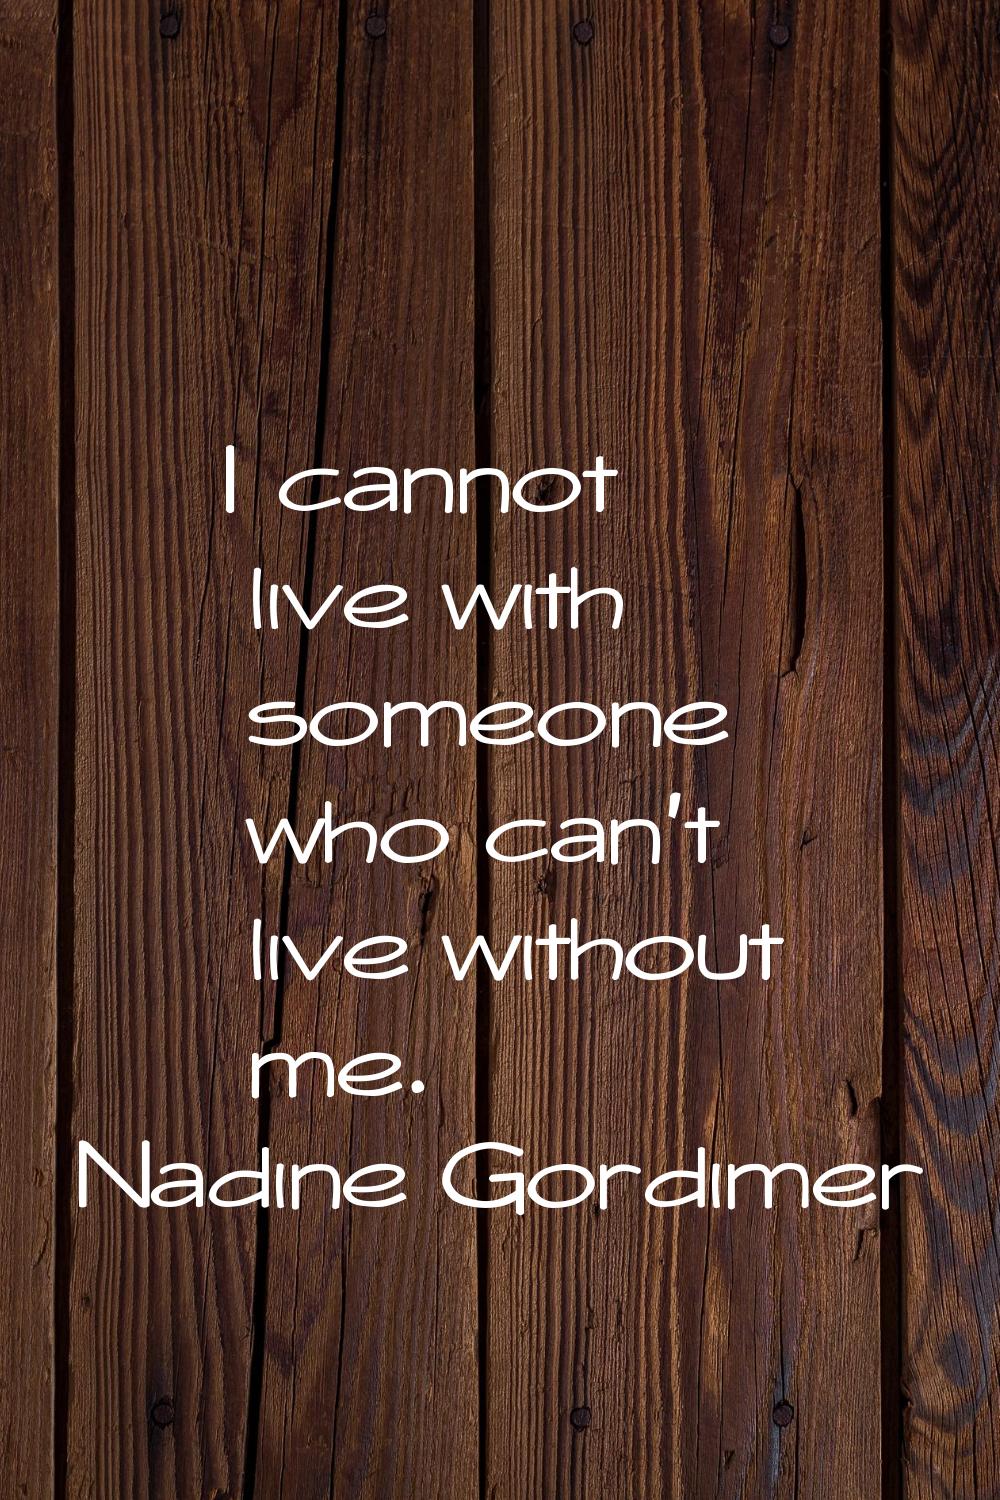 I cannot live with someone who can't live without me.